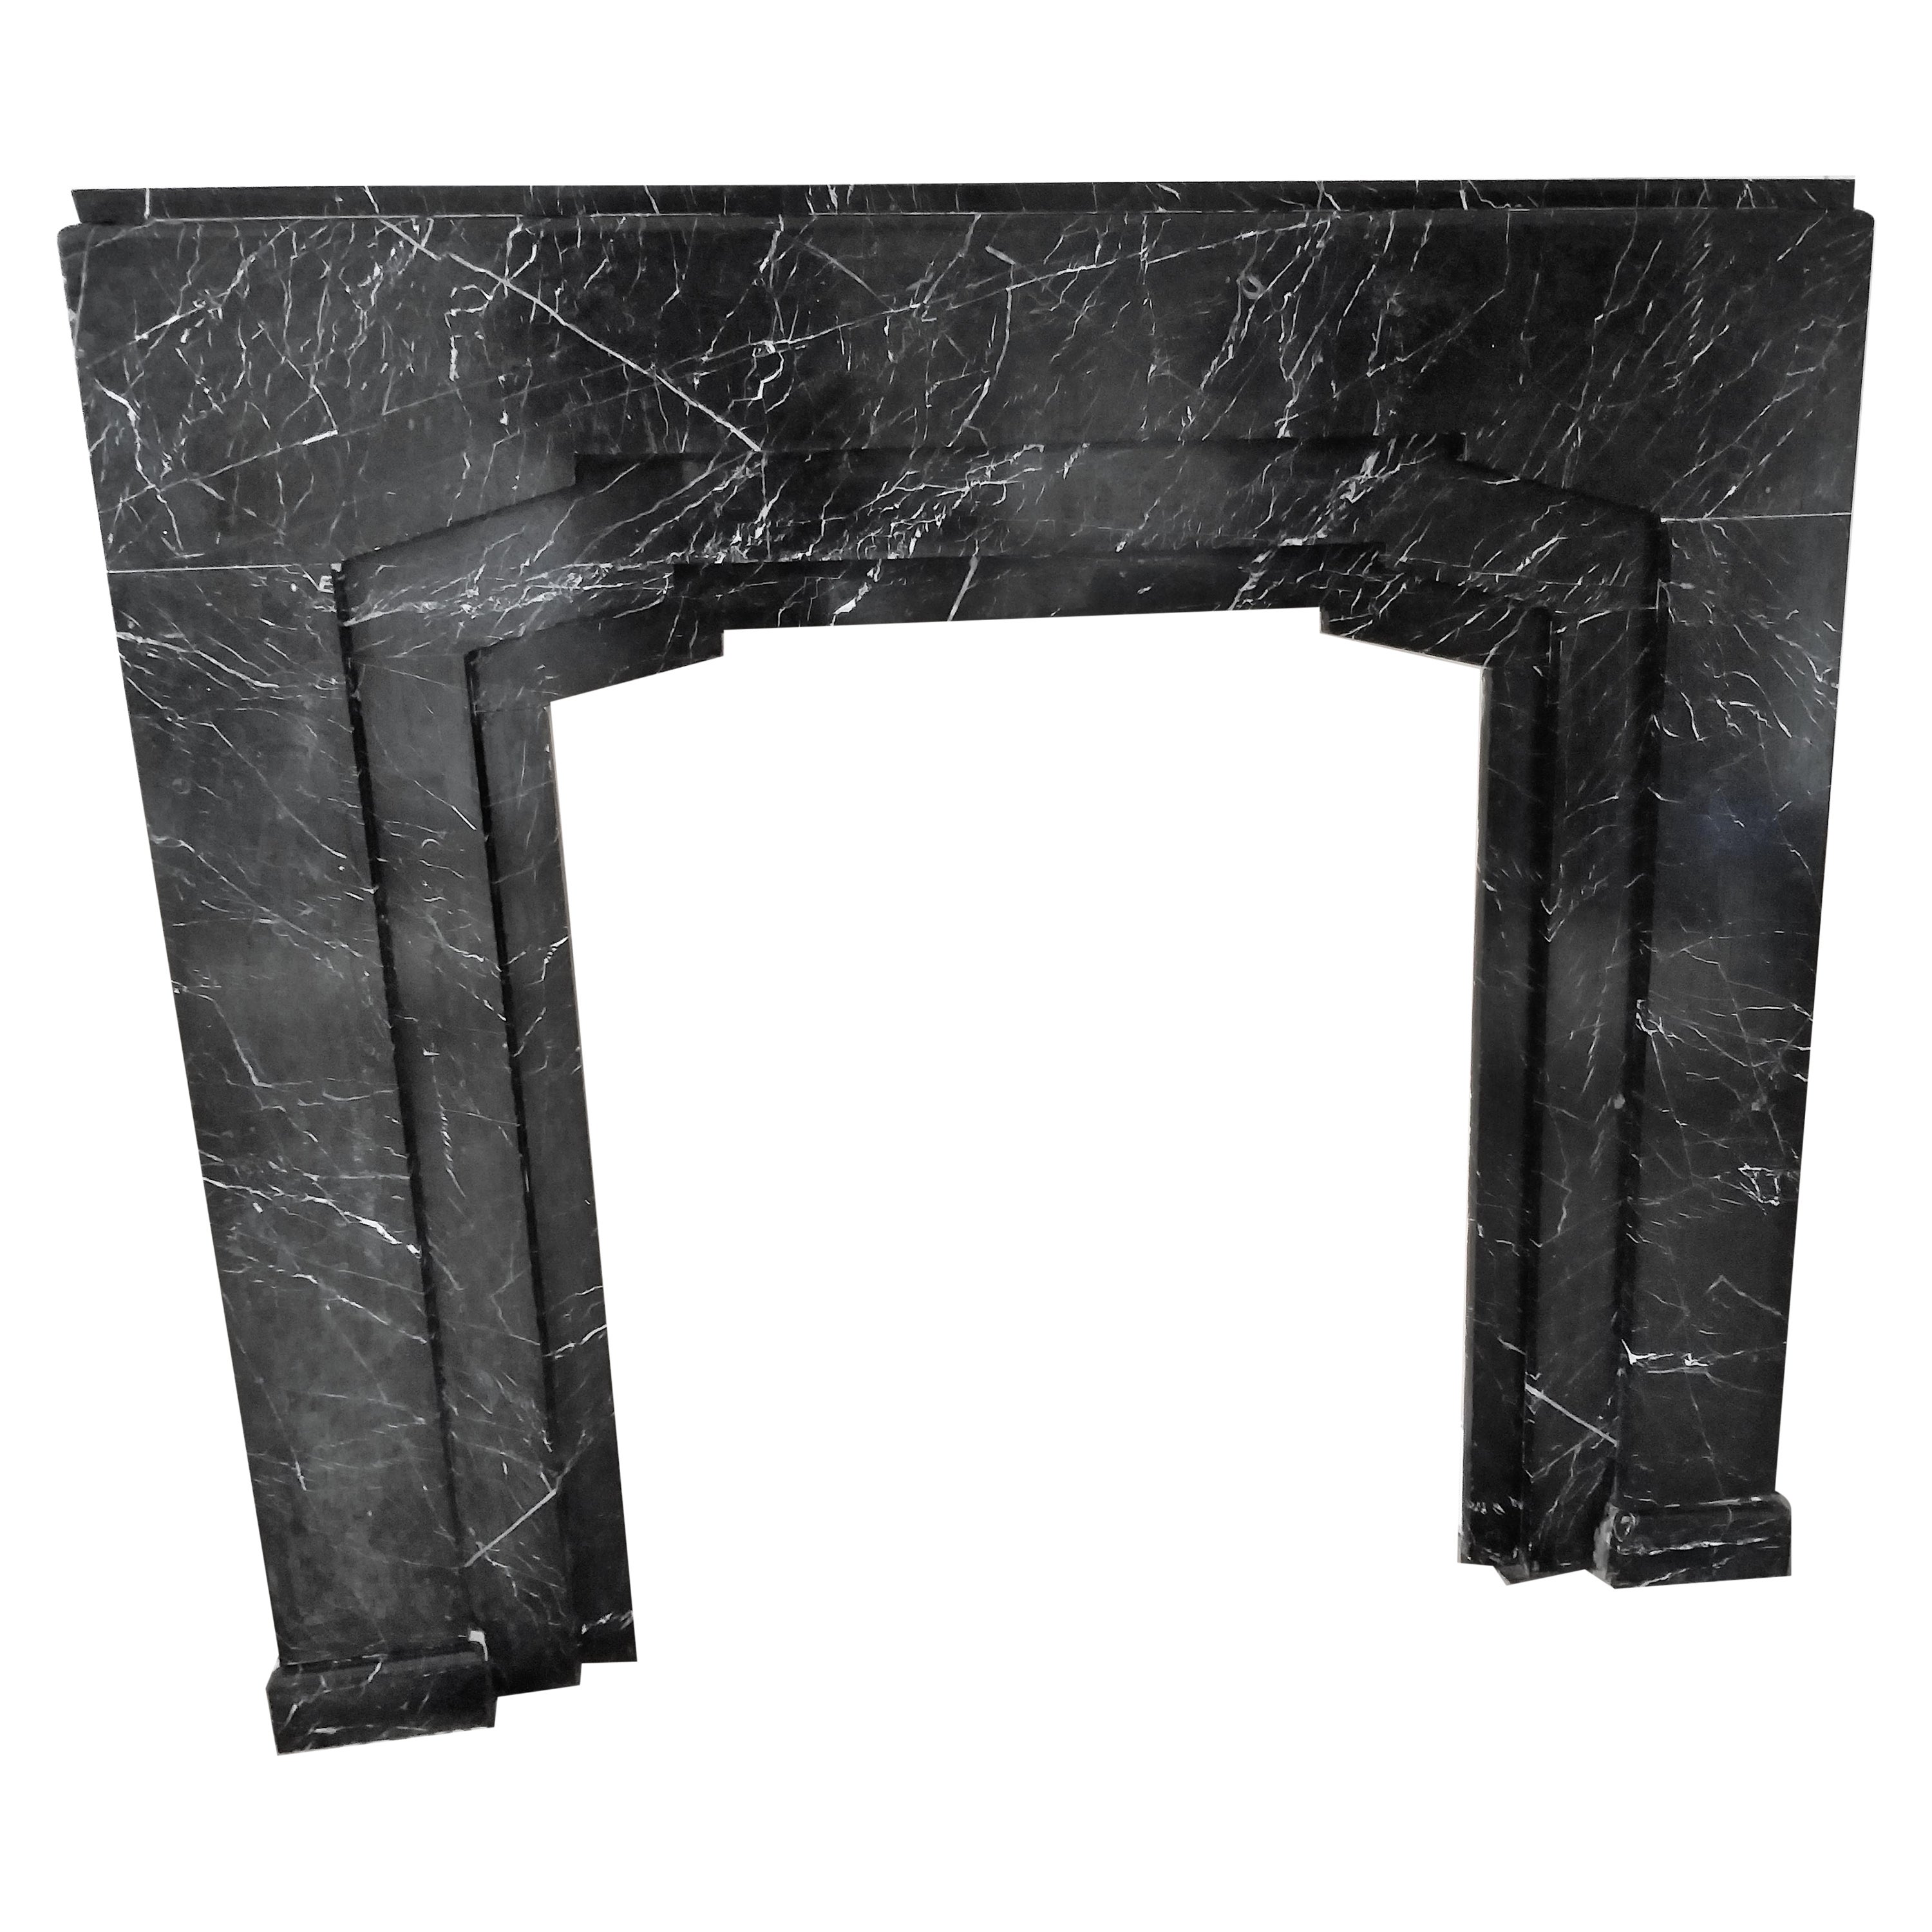 Art Deco Fireplace in Nero Marquina Marble For Sale